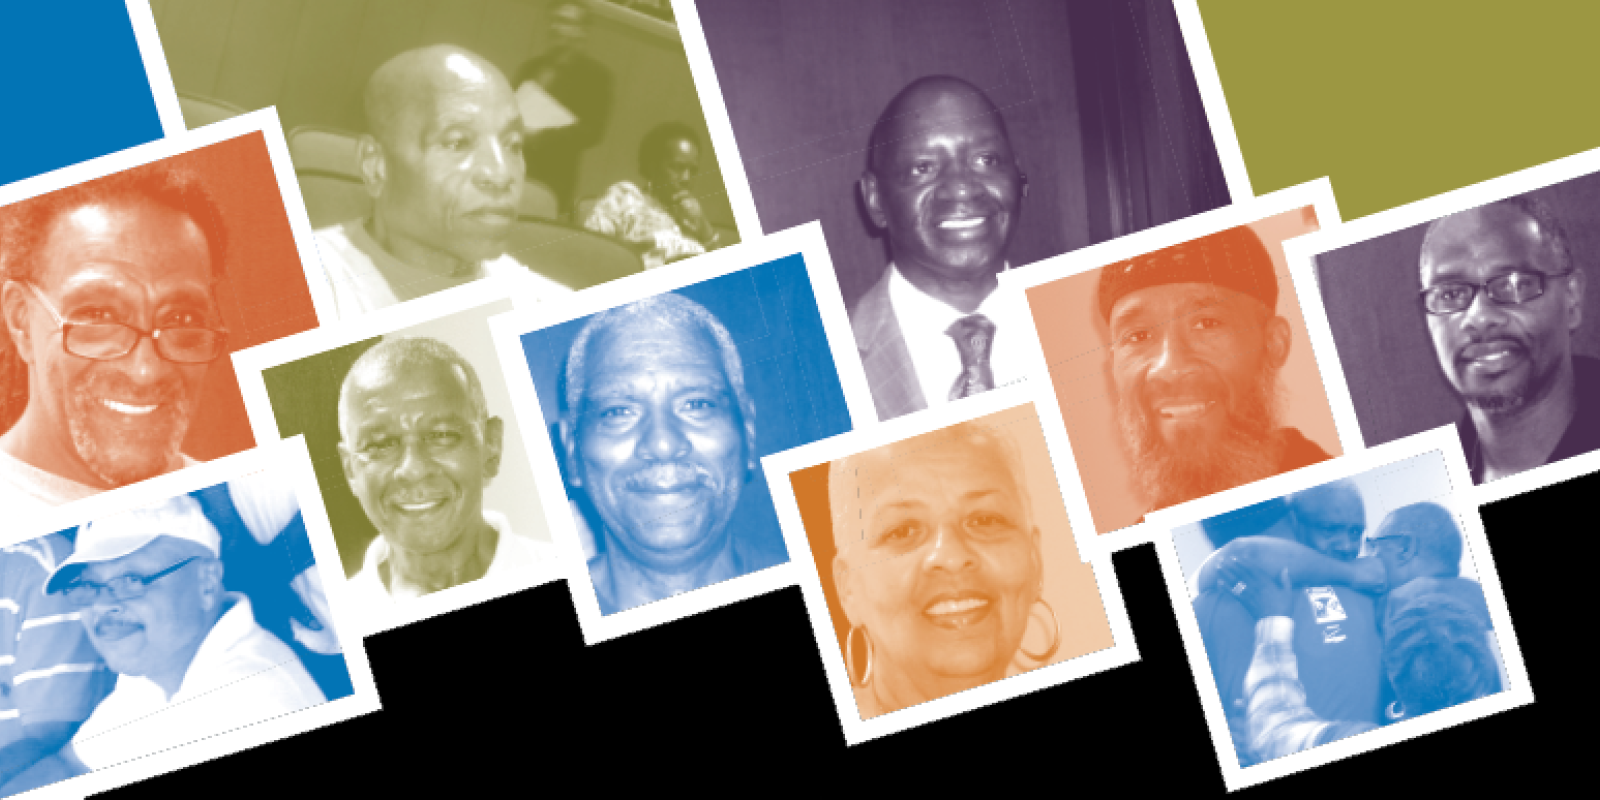 Image from the cover of the Still Blocking the Exit report by ACLU of Maryland. There are square images of Black people's faces with color overlays of blue, orange, green, and purple.